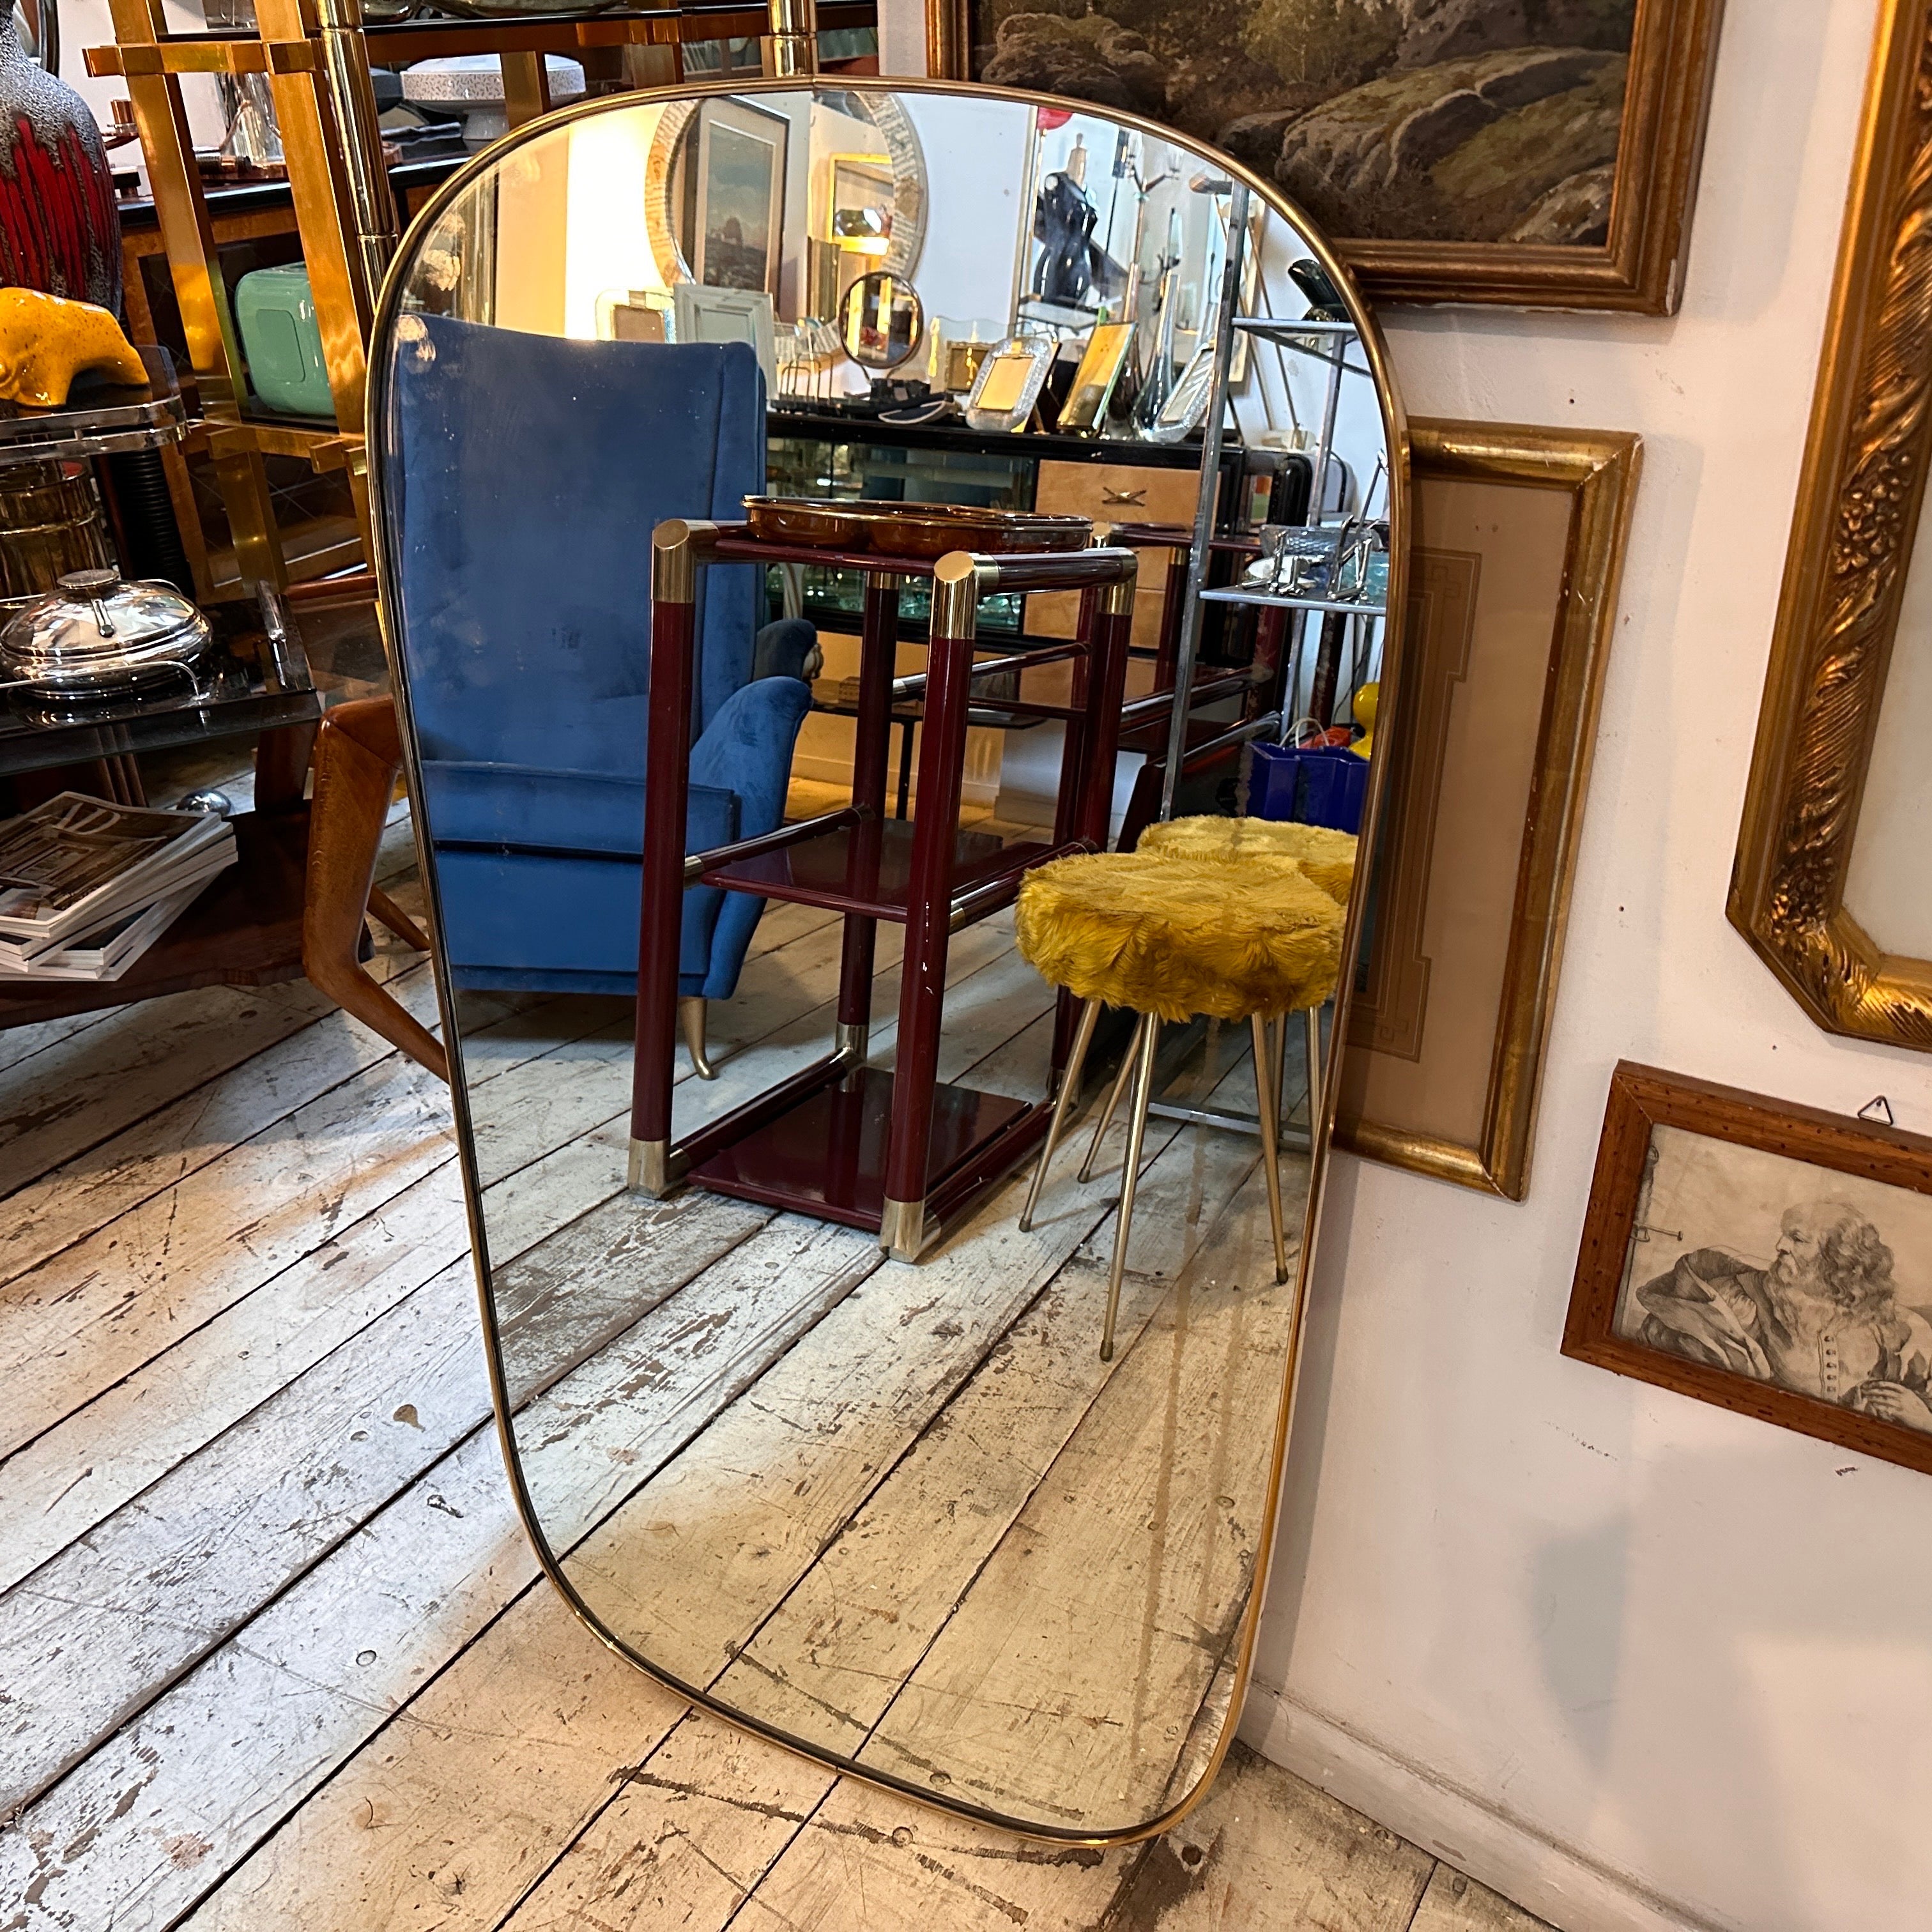 An huge mid-century modern oval shaped solid brass wall mirror hand-crafted in Italy in the Fifties in the manner of Gio Ponti, brass it's in original patina, the original glass has some stains, please see all the photos not only the first one.
This